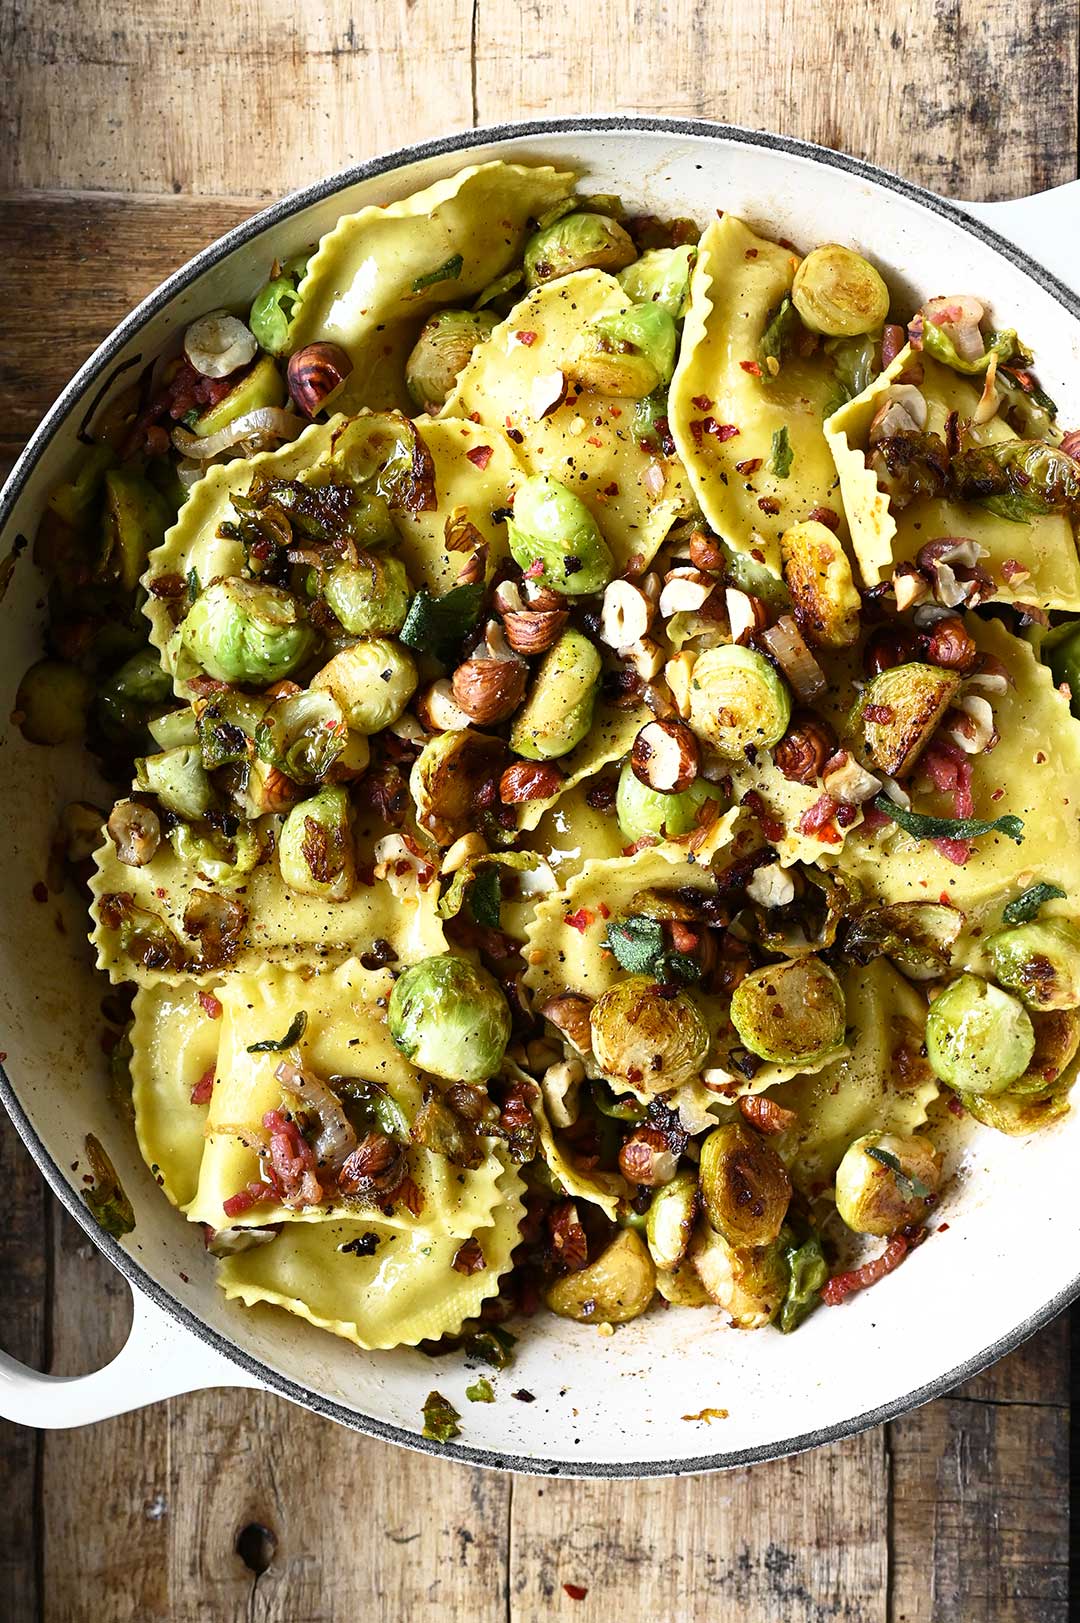 cheese ravioli with sautéed brussels sprouts